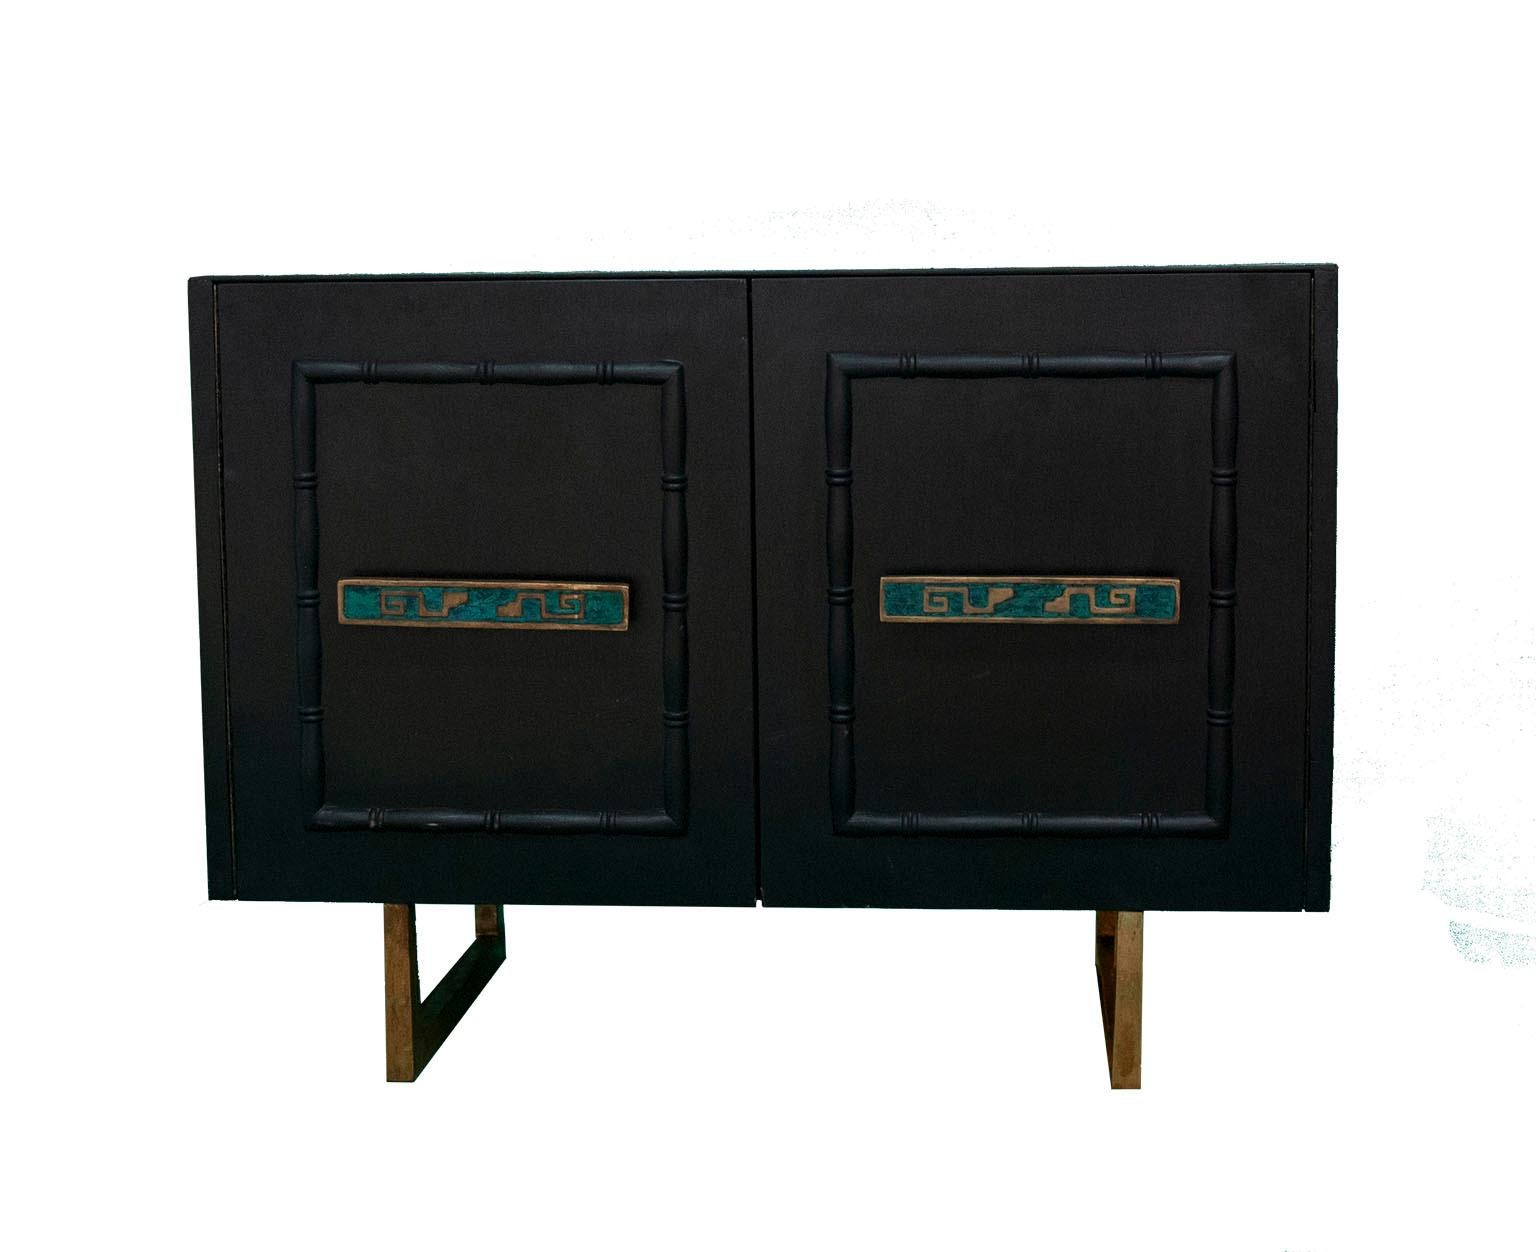 Ebonized mahogany cabinet finished in matte black, with bronze pulls from Pepe Mendoza with blue and green enamel.
The legs are made of bronze in natural finish.